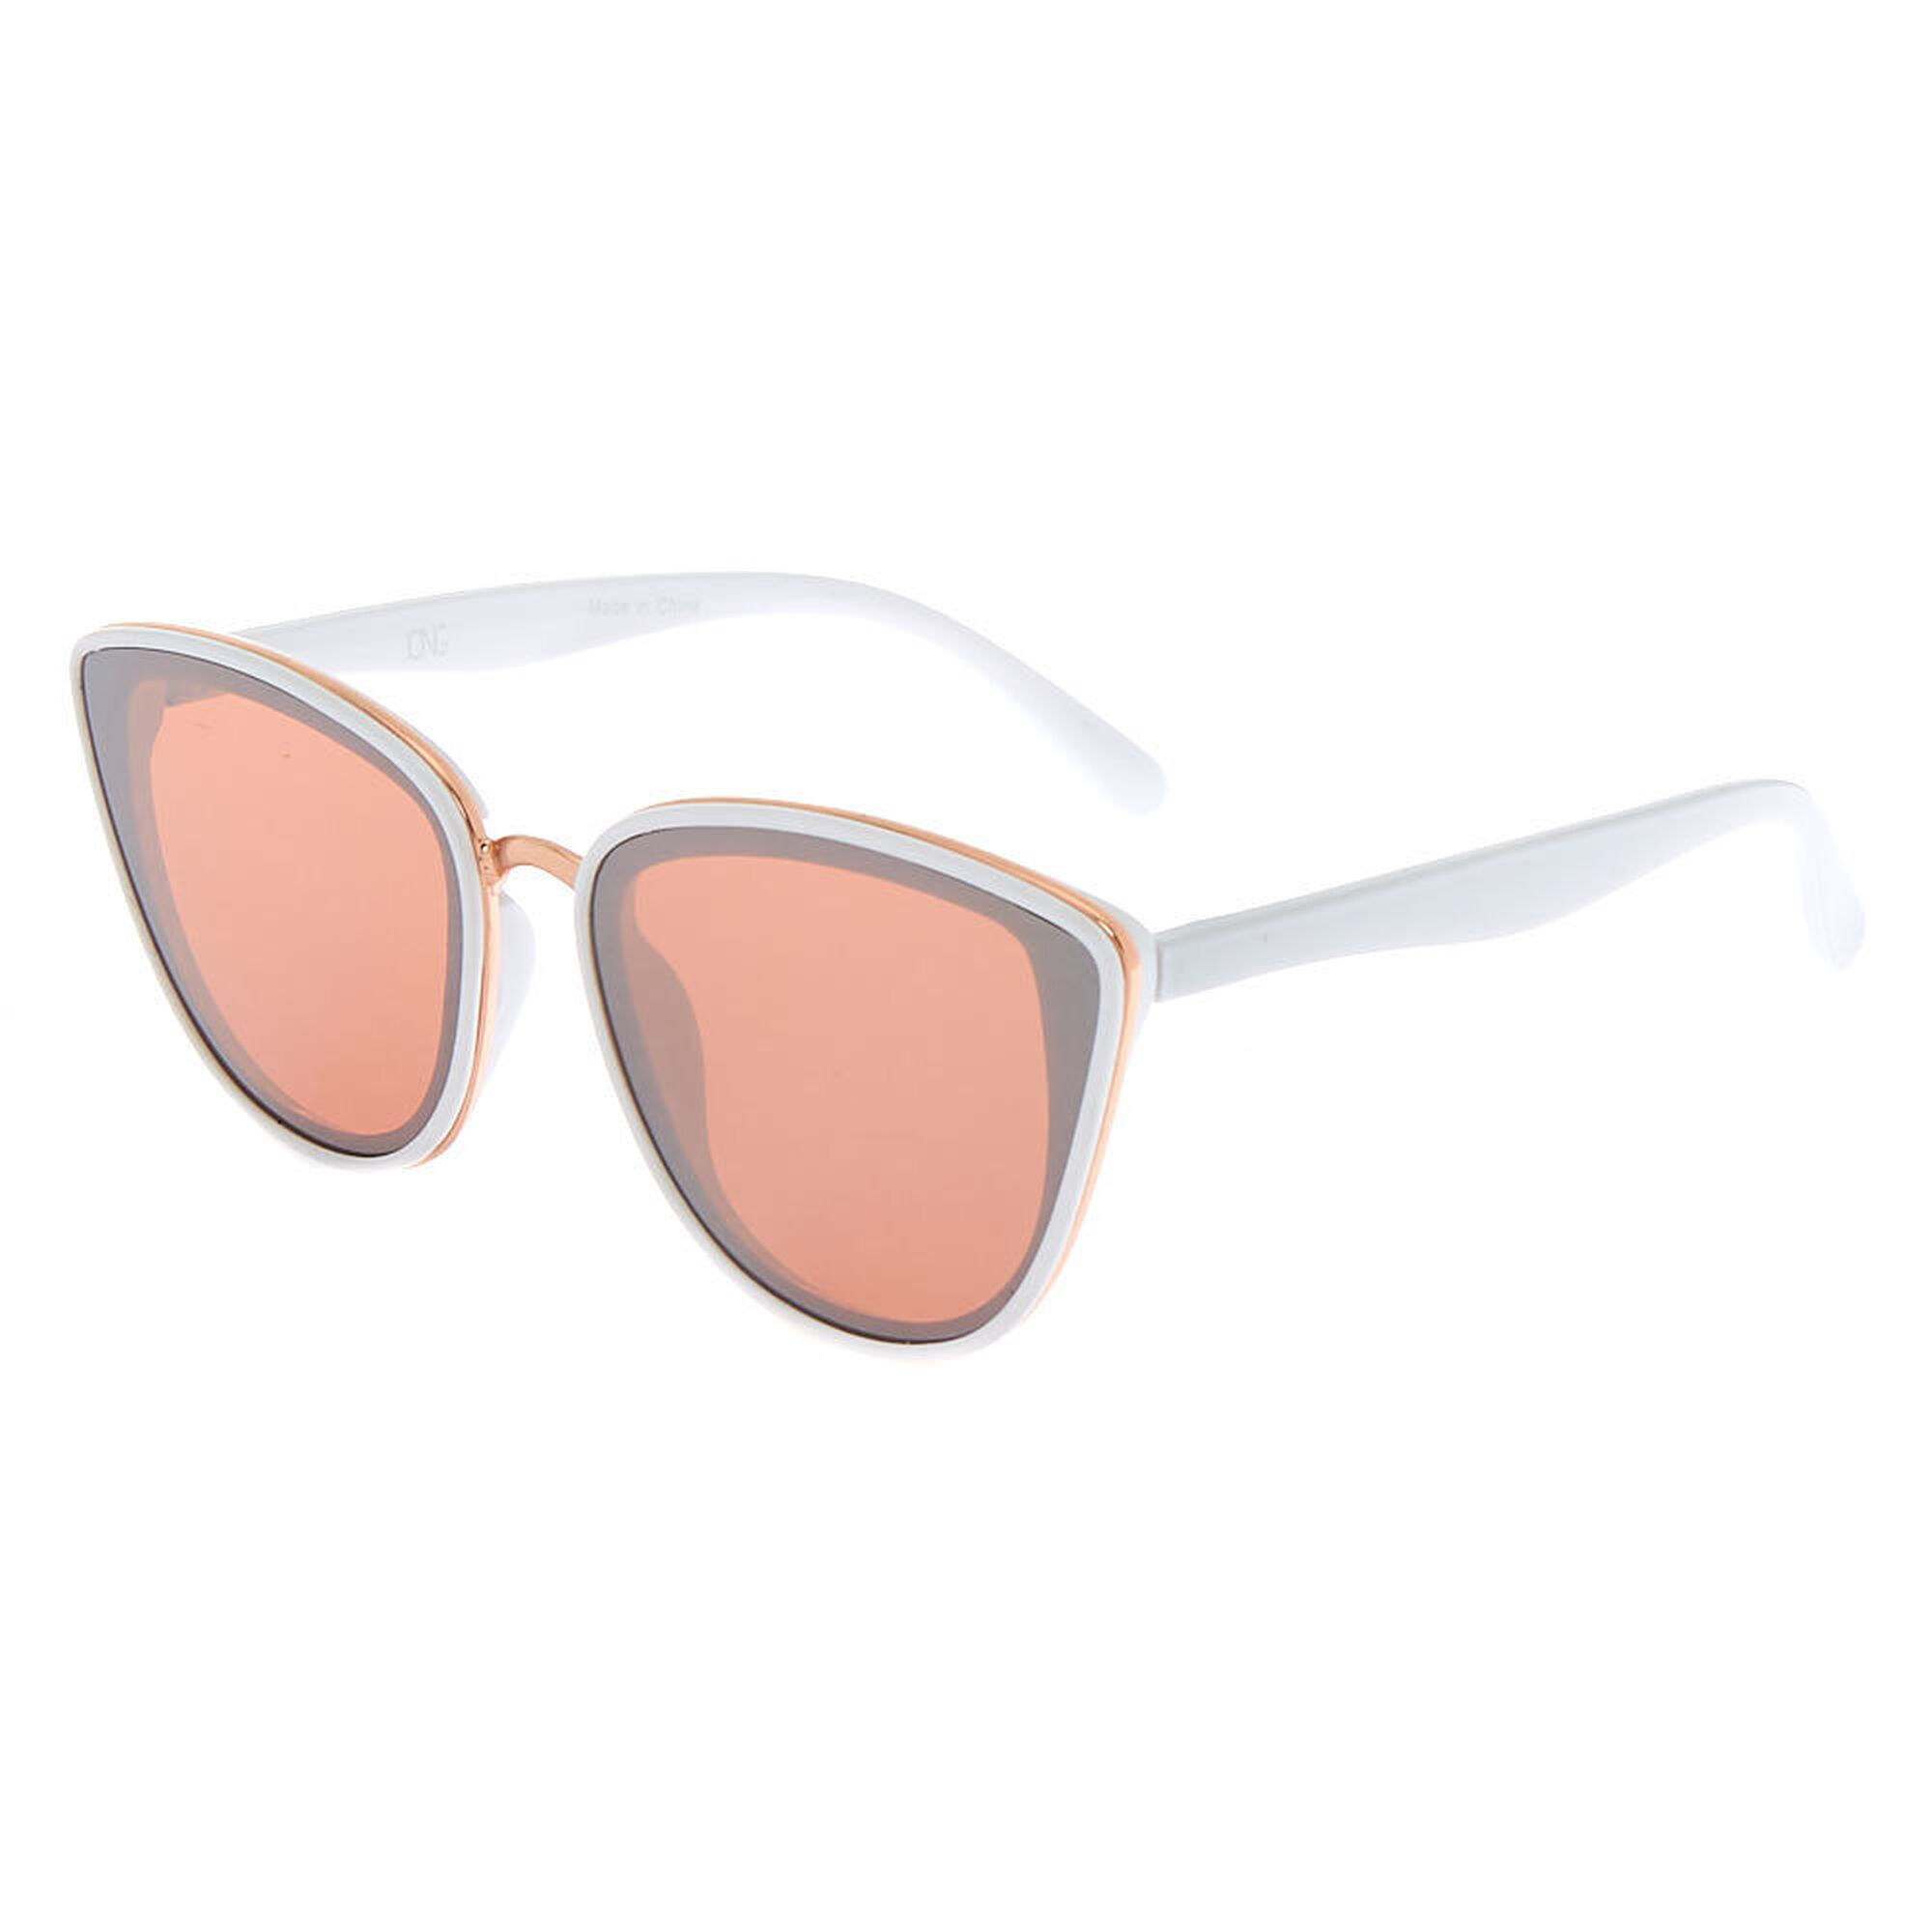 Mirrored Mod Cat Eye Sunglasses White Claires Us 